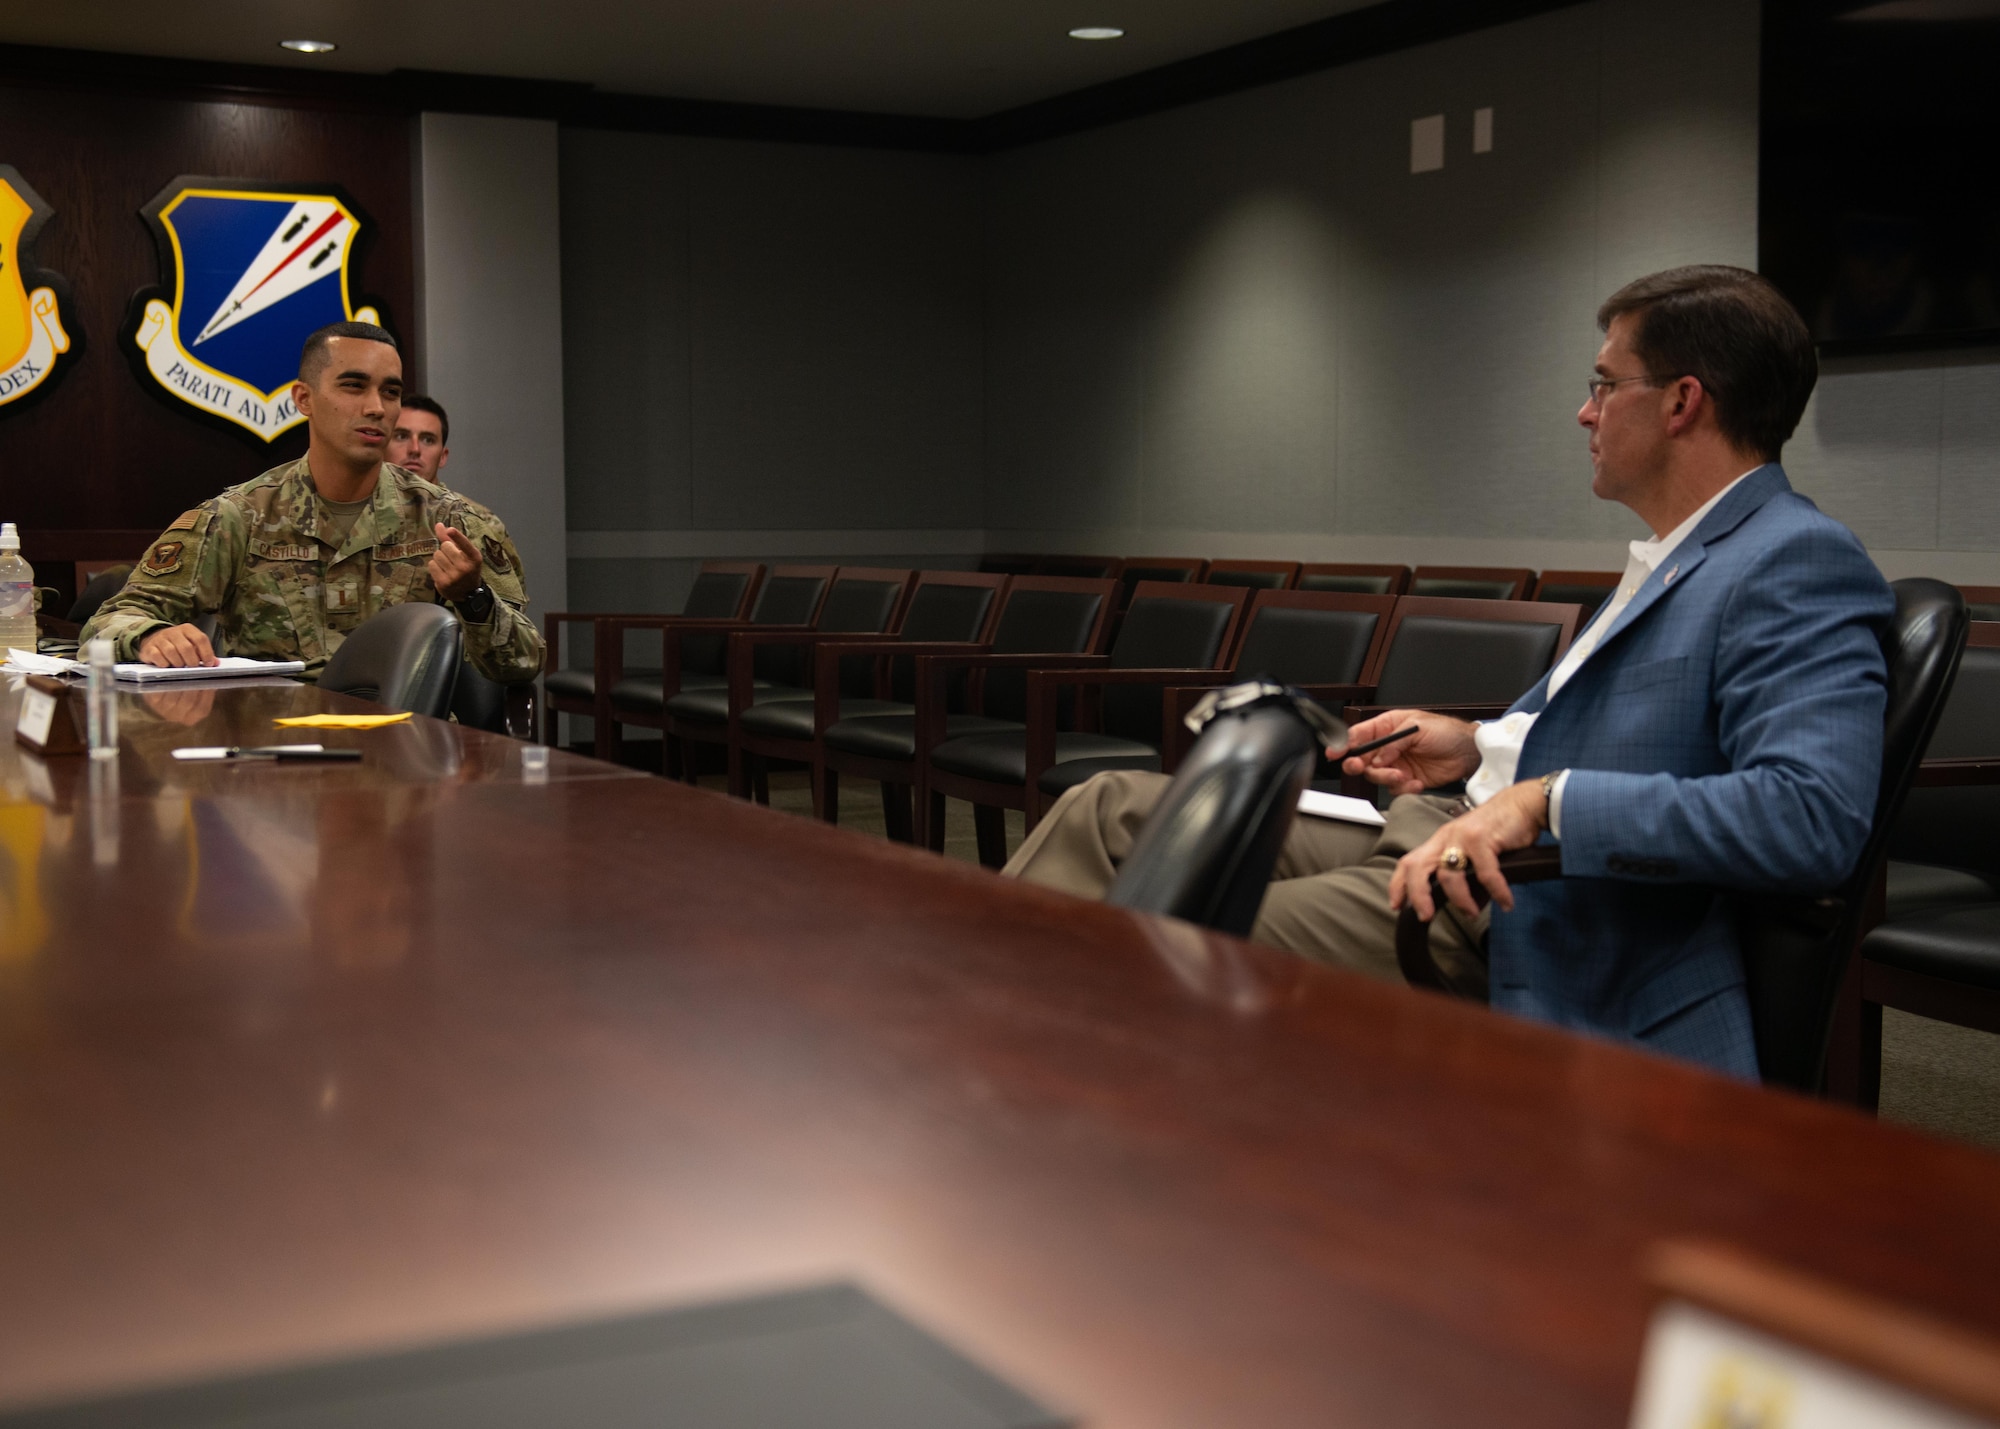 Then-2nd Lt. Nephtali Castillo, 509th Operational Medical Readiness Squadron bioenvironmental engineer, briefs then-Secretary of Defense Dr. Mark T. Esper, during a base visit by the senior defense official to Whiteman Air Force Base, Mo., July 22, 2020. Castillo briefed Esper on his idea of bringing commissioned officer recruiting to his home island of Puerto Rico.